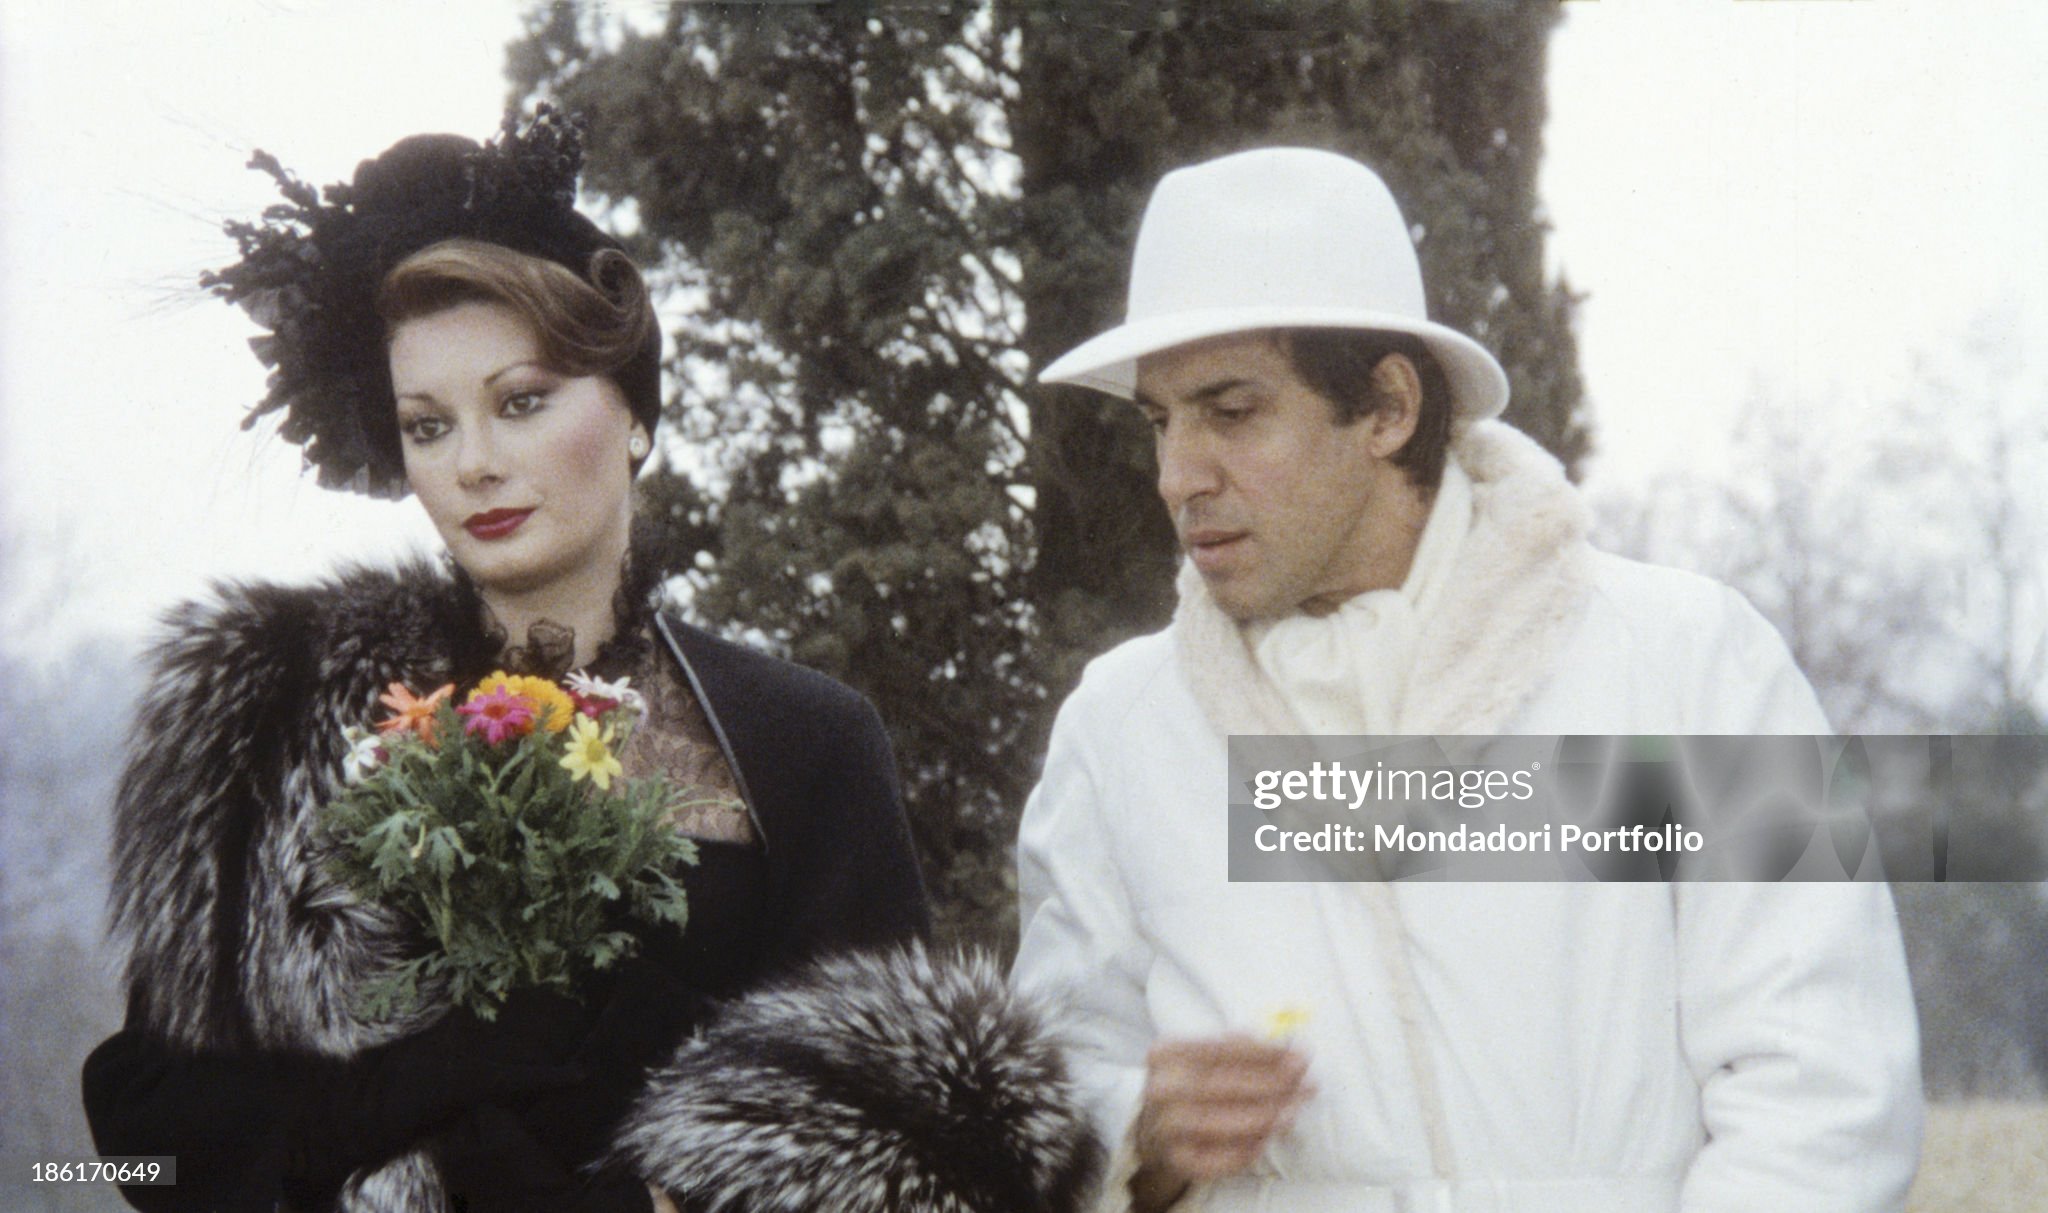 Italian actor, singer and songwriter Adriano Celentano giving some flowers to French-born Italian actress Edwige Fenech in the film Ace in Italy in 1981. 